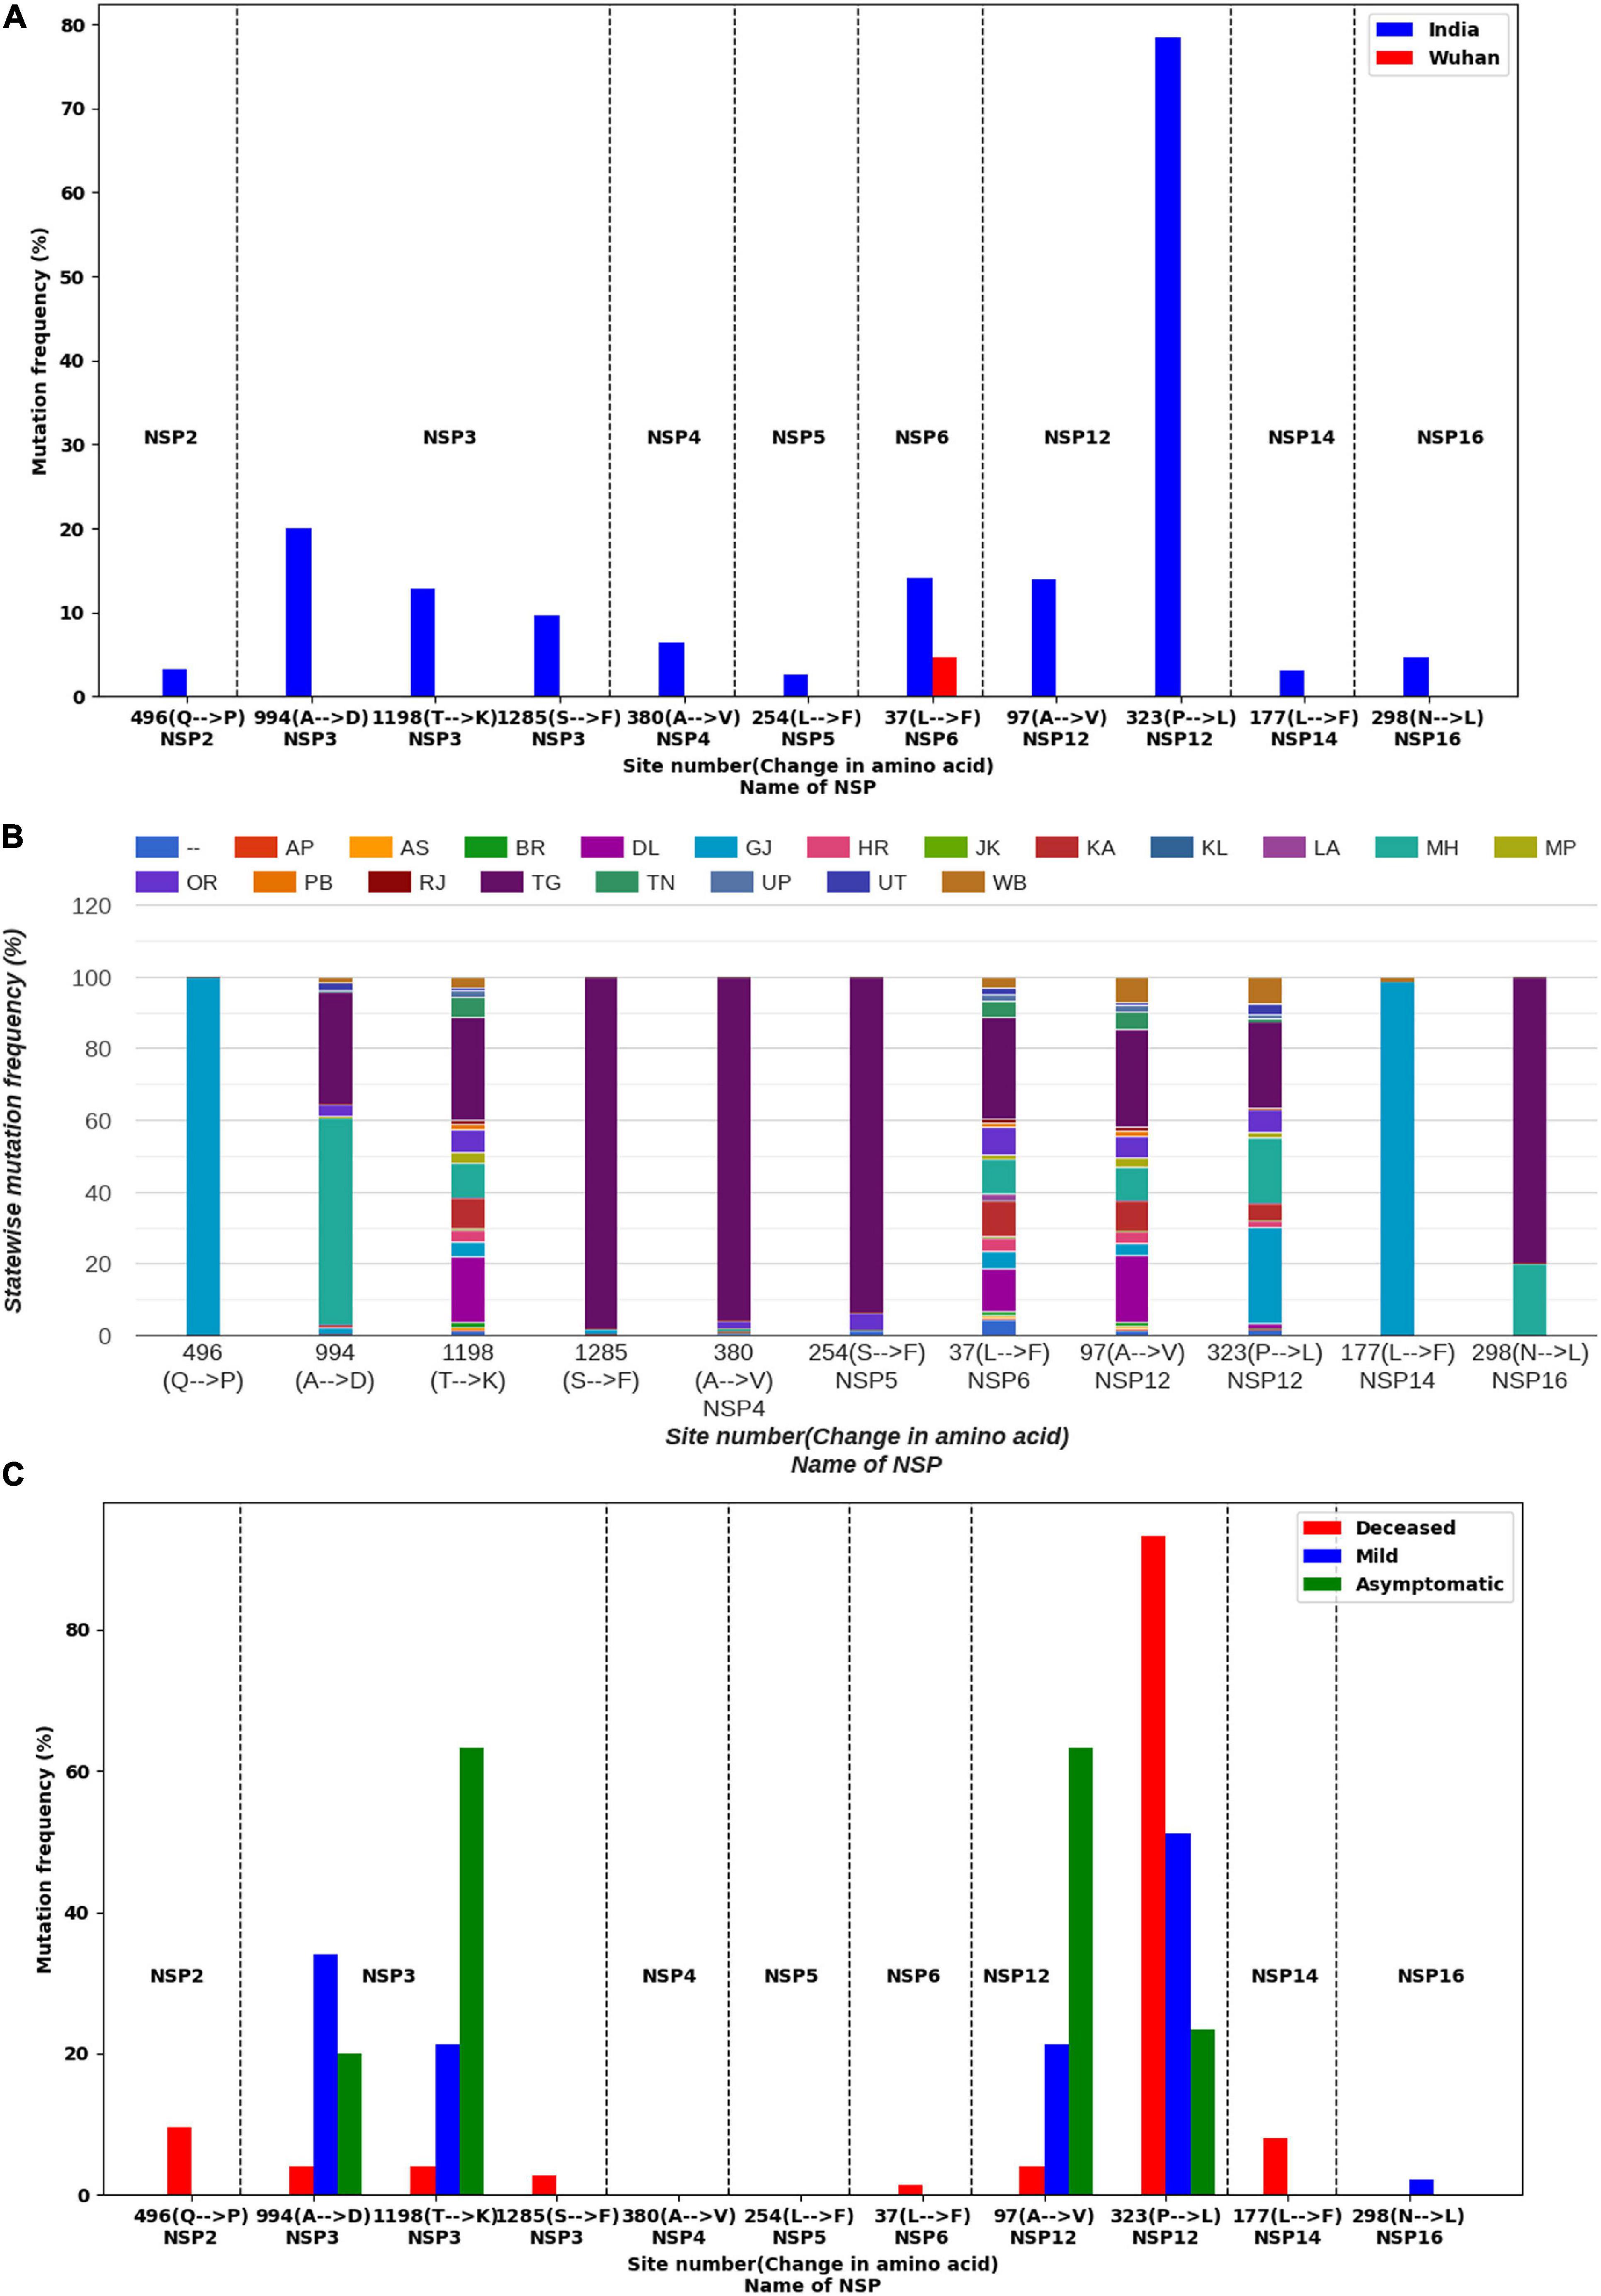 Frontiers Structural And Drug Screening Analysis Of The Non Structural Proteins Of Severe Acute Respiratory Syndrome Coronavirus 2 Virus Extracted From Indian Coronavirus Disease 19 Patients Genetics